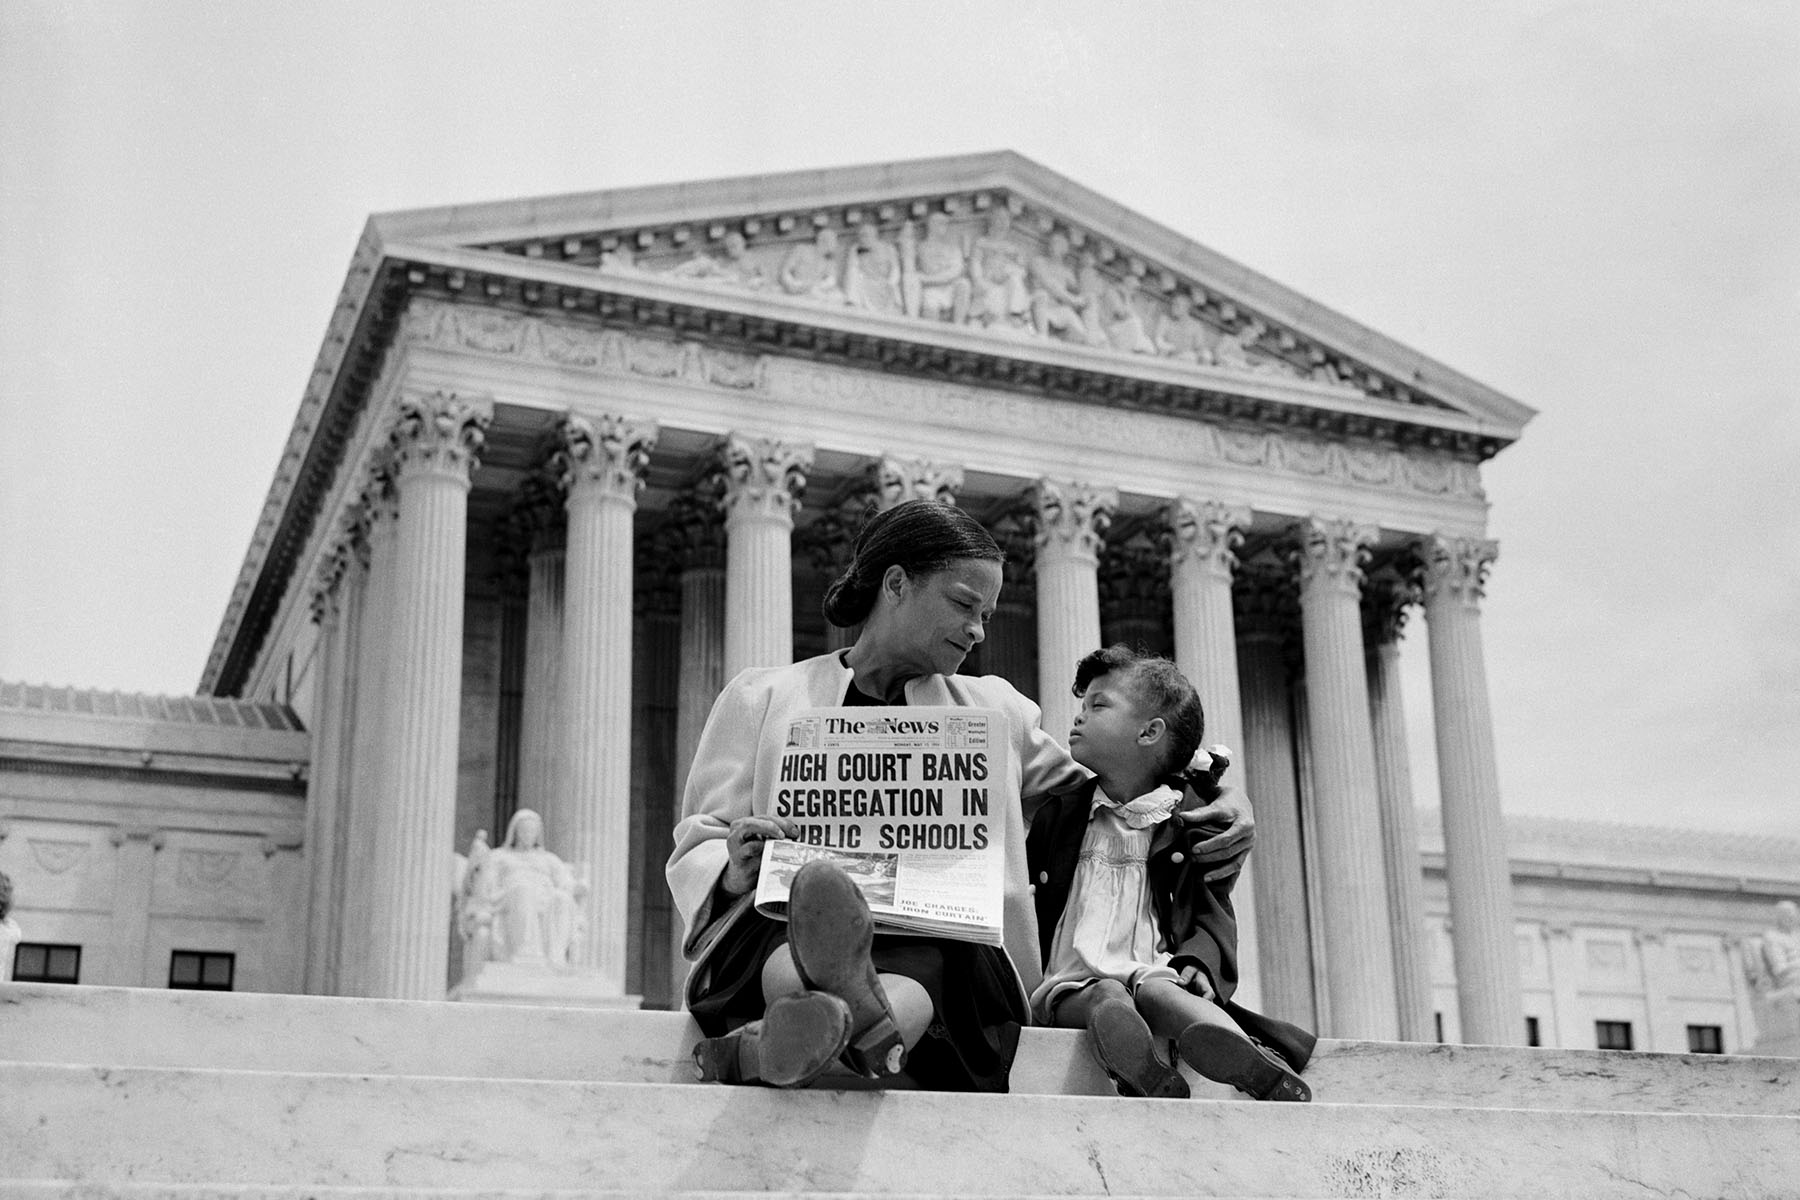 Nettie Hunt and her daughter Nickie sit in front of the U.S. Supreme Court as Nettie holds a newspaper that reads "High Court Bans Segregation in Public Schools"